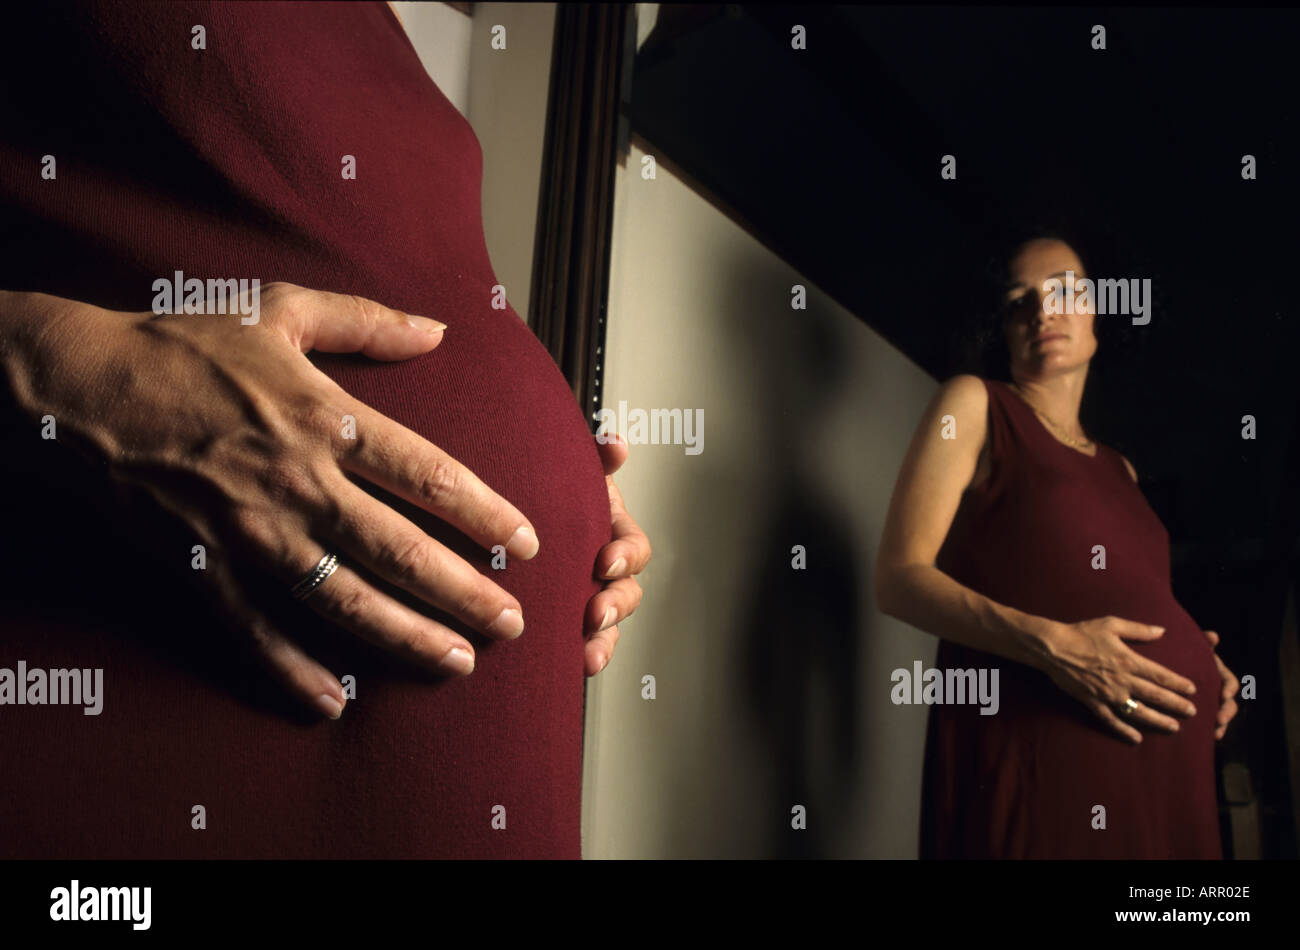 Pregnant woman looking at herself in a mirror and contemplating her future child. Stock Photo